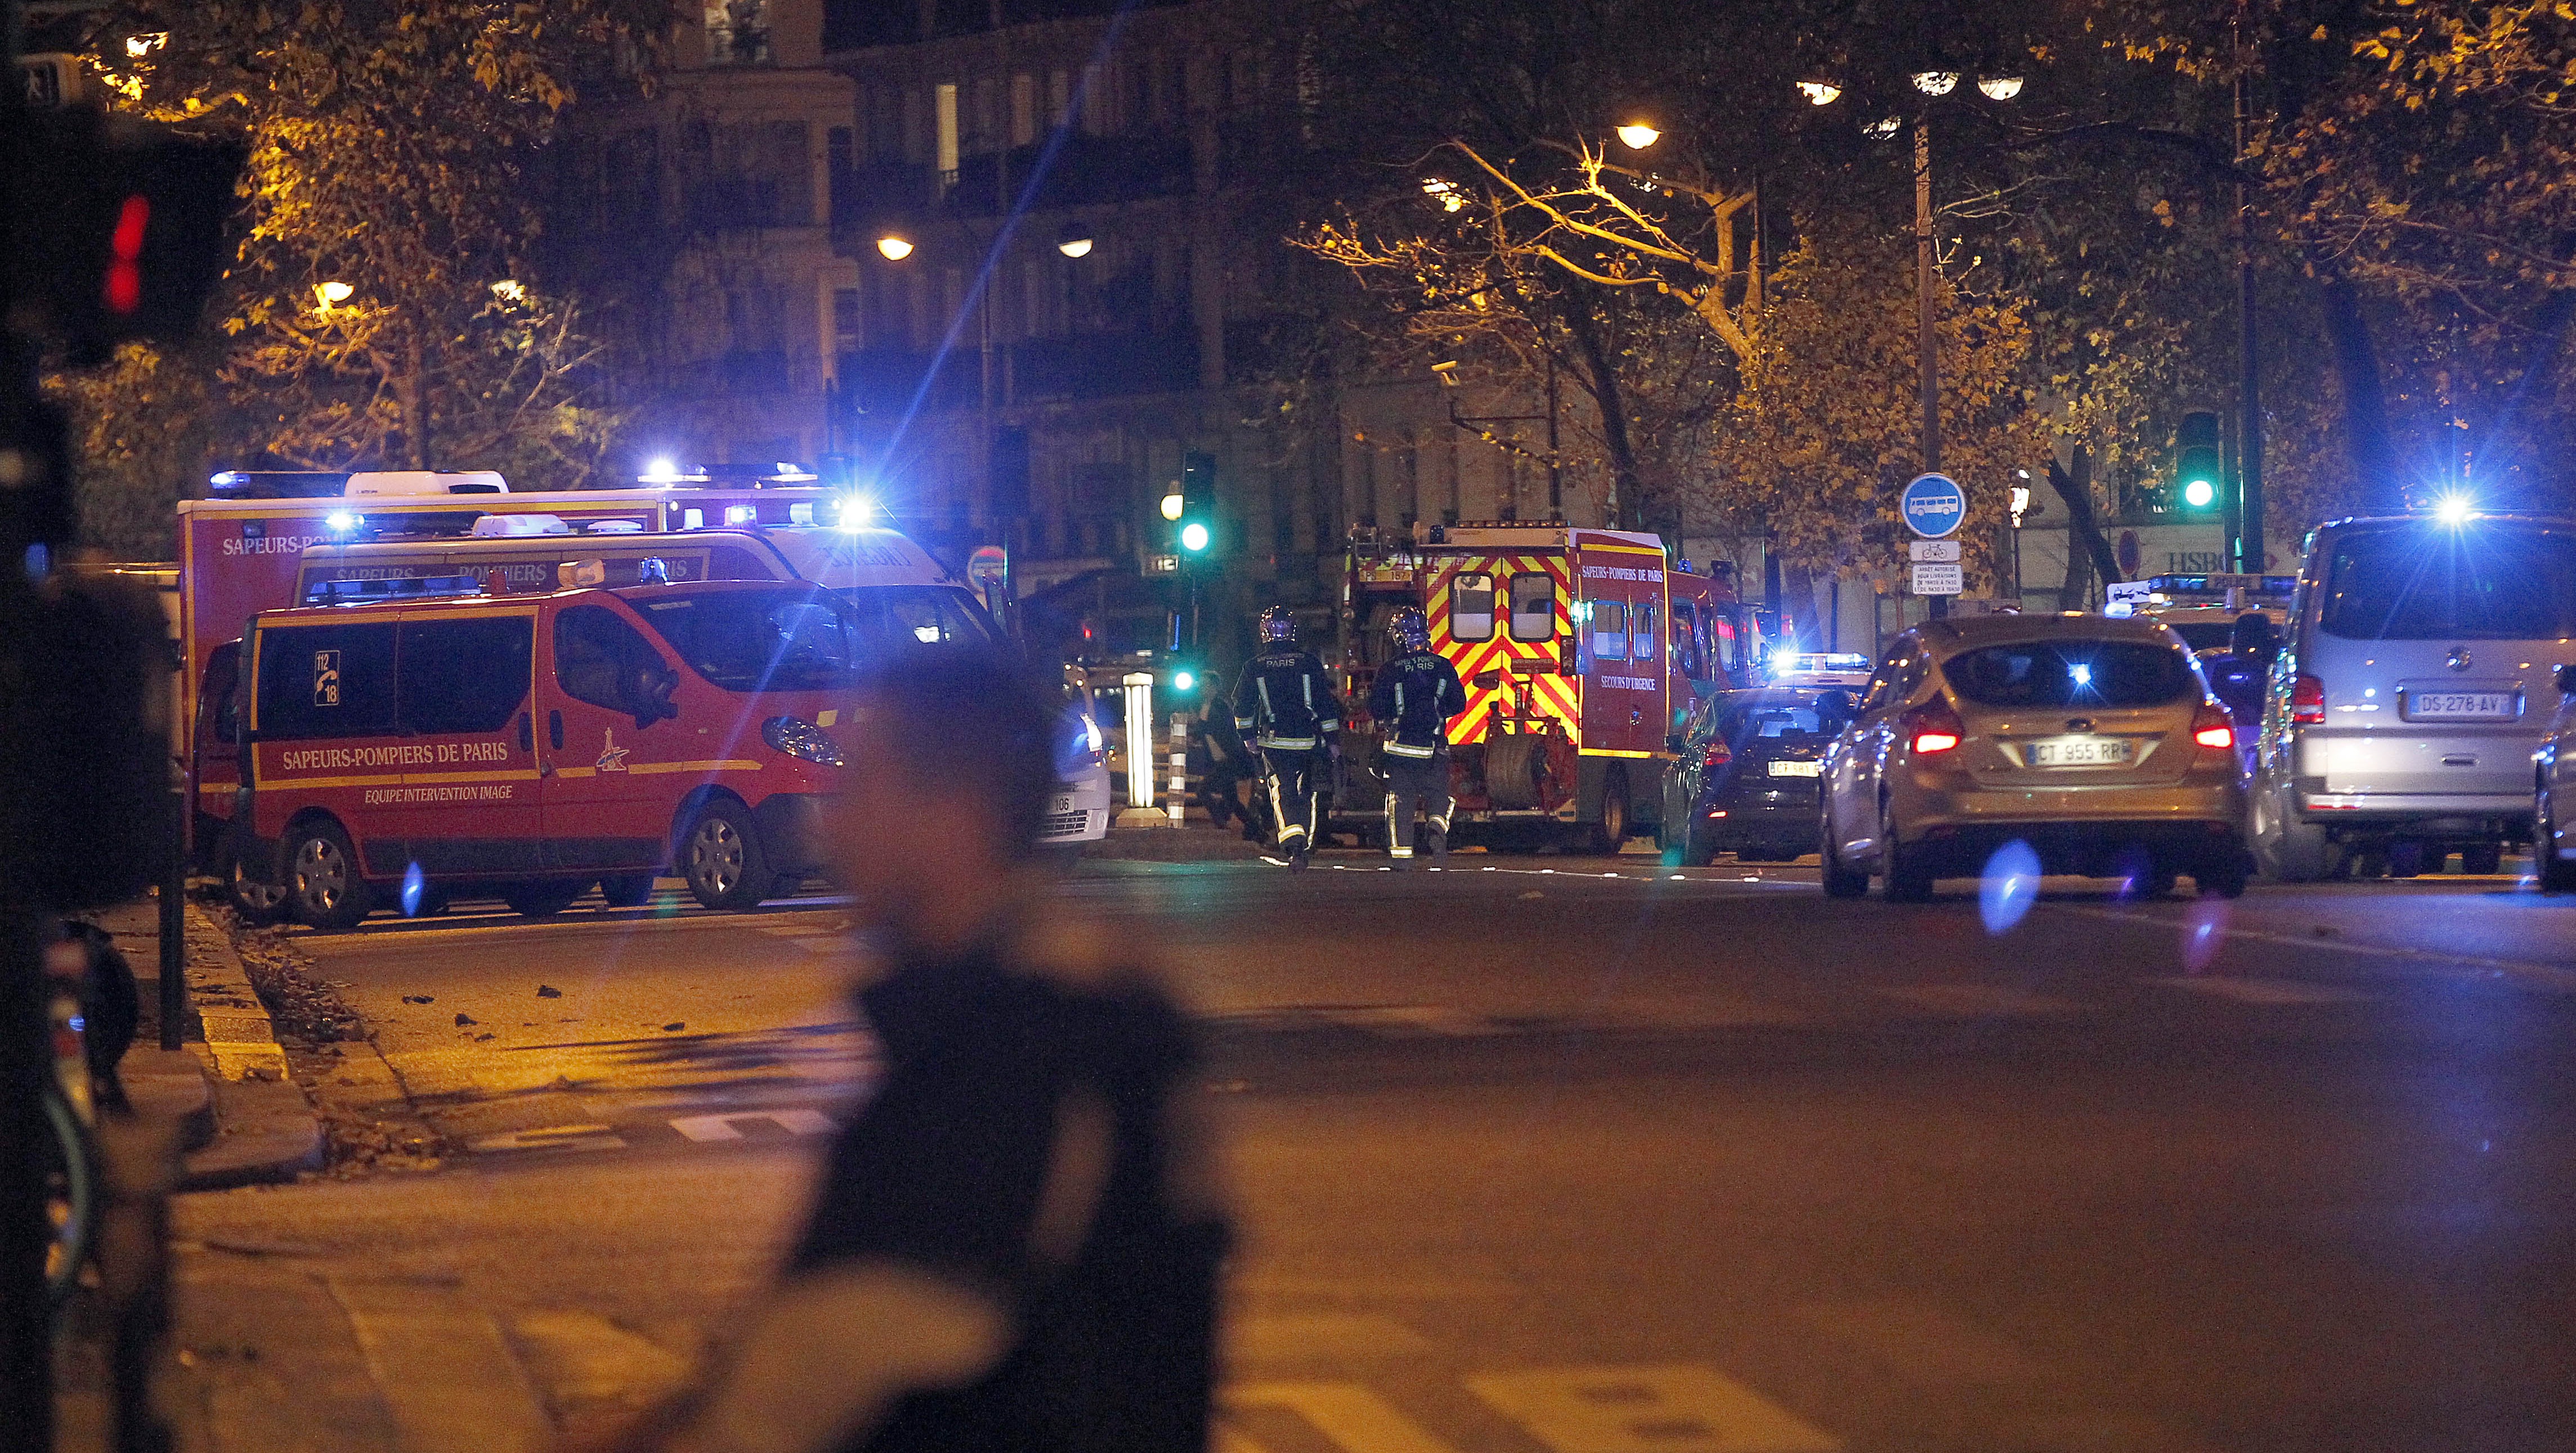 PARIS, FRANCE - NOVEMBER 13:  Police survey the area of Boulevard Baumarchais after an attack in the French capital on November 13, 2015 in Paris, France. At least 18 people were killed in a series of gun attacks across Paris, as well as explosions outside the national stadium where France was hosting Germany.  (Photo by Thierry Chesnot/Getty Images)